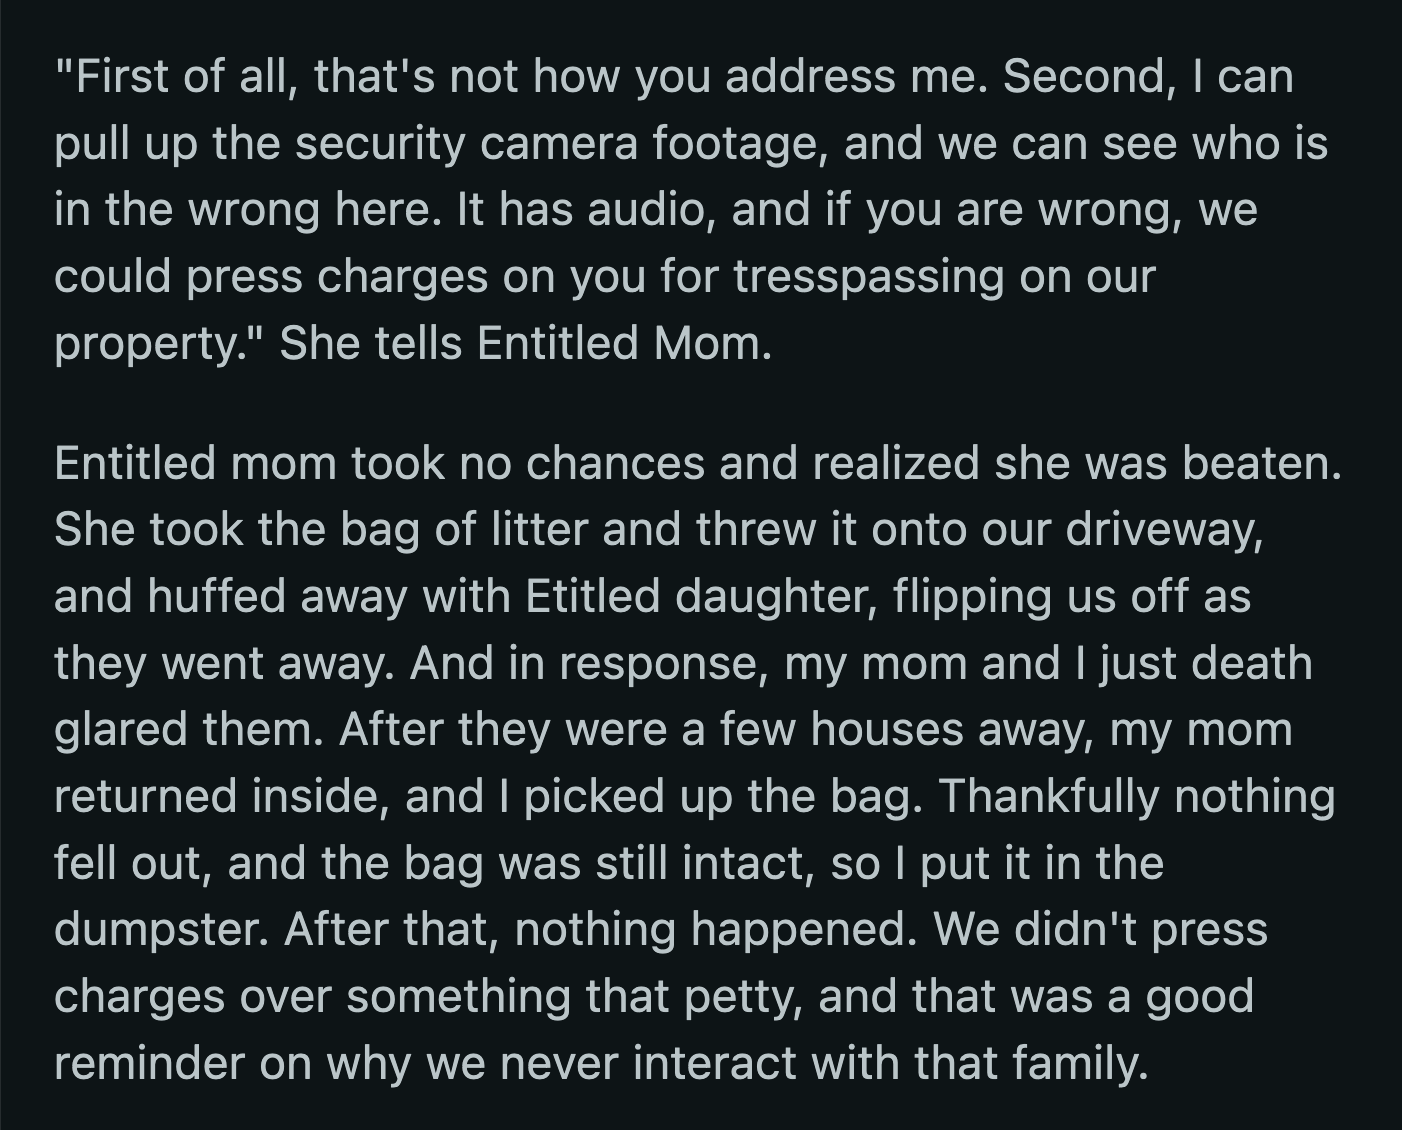 OP's mom took offense to the entitled lady's yelling. She informed her they had security cameras on their property. She could check if she told the correct version of events and threatened to call the cops if she lied and trespassed on their property. Mom and daughter left, unwilling to test their luck with law enforcement.